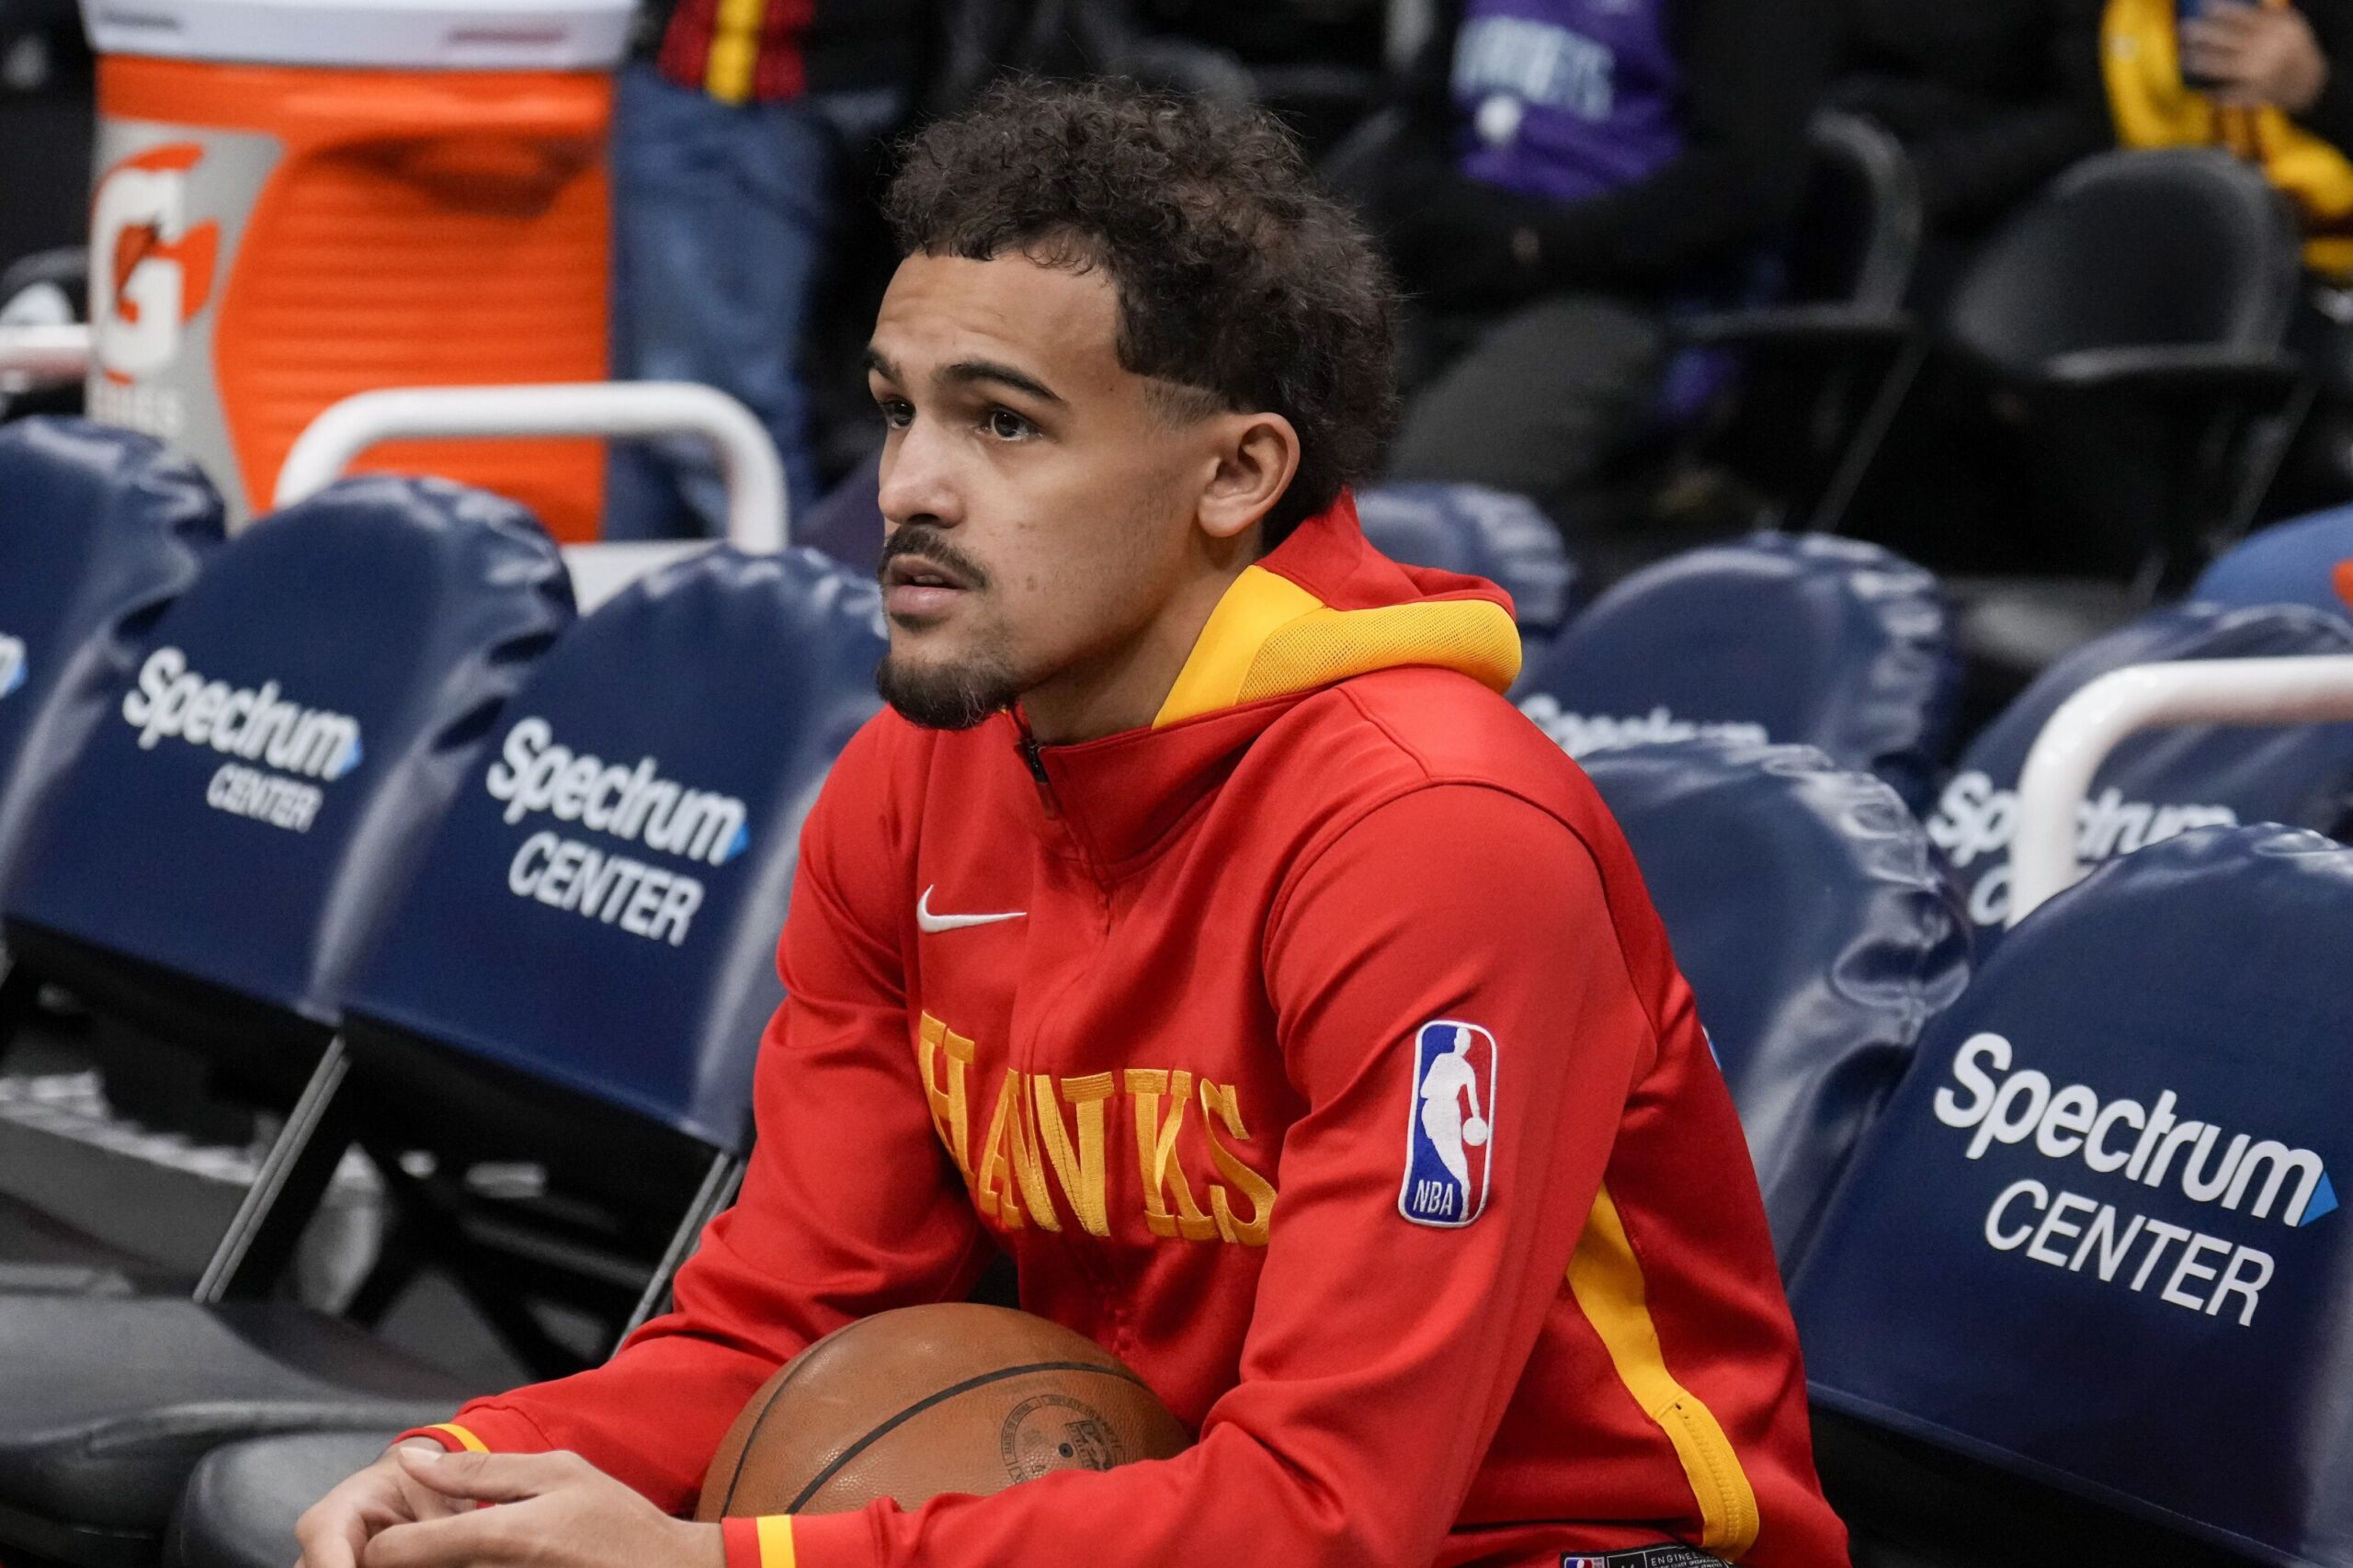 Atlanta Hawks guard Trae Young snubbed from 2021 NBA All-Star